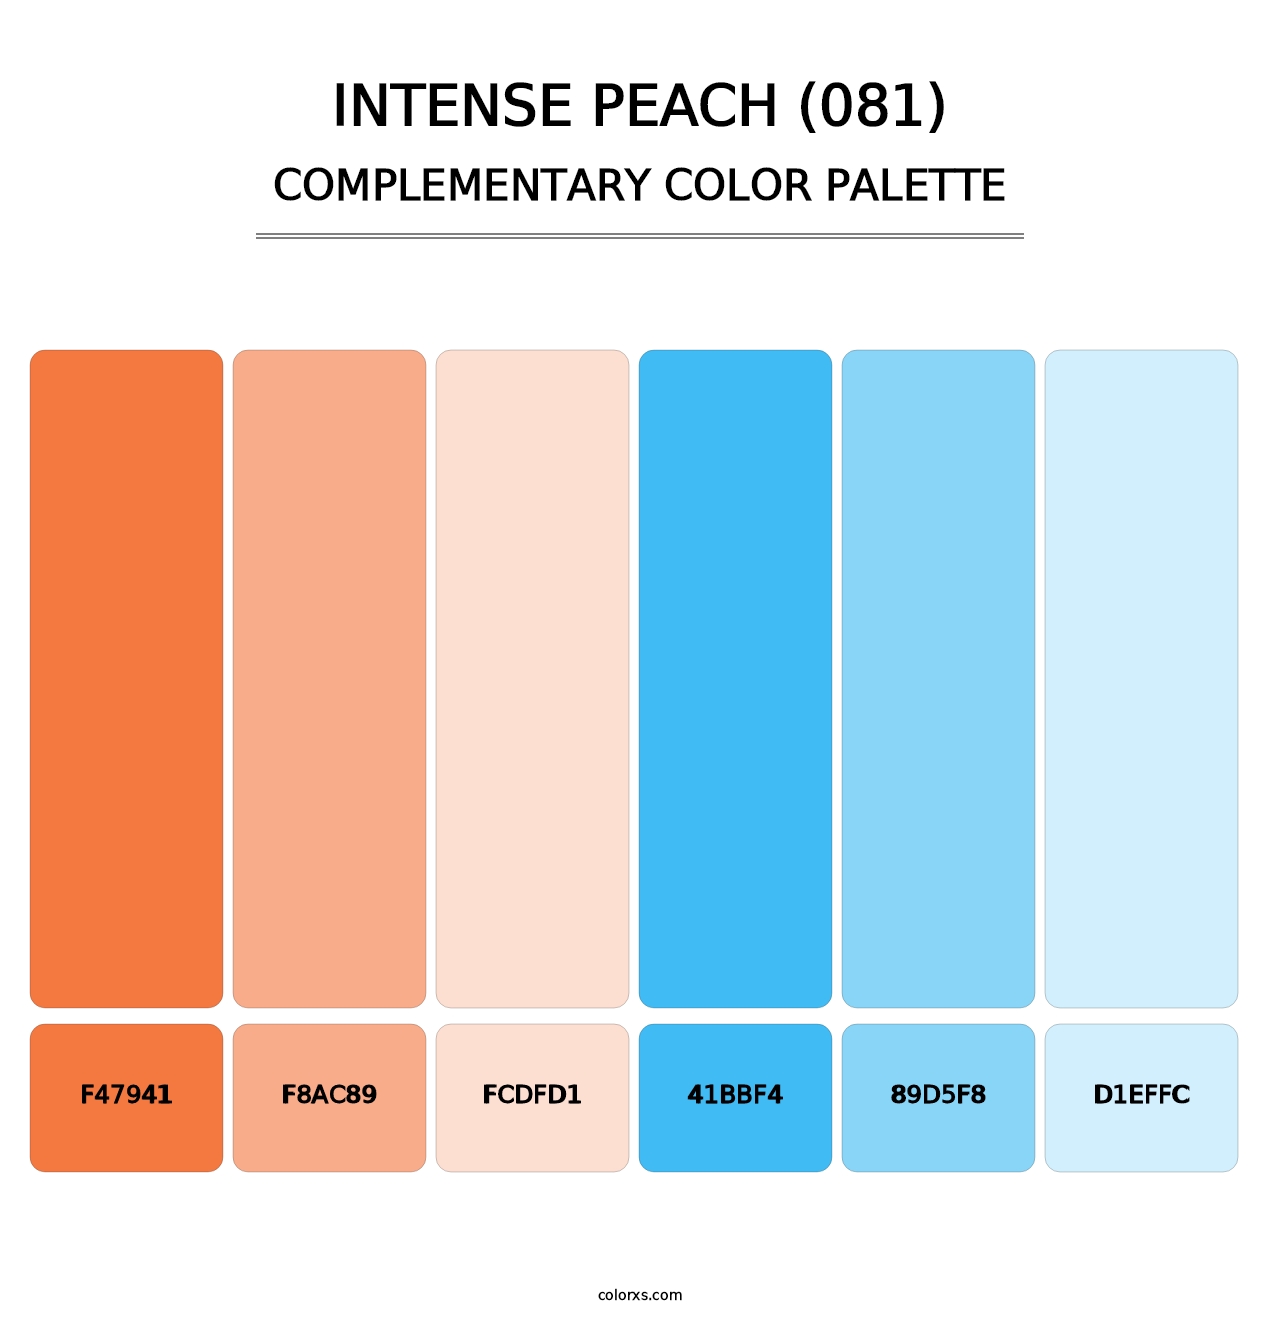 Intense Peach (081) - Complementary Color Palette